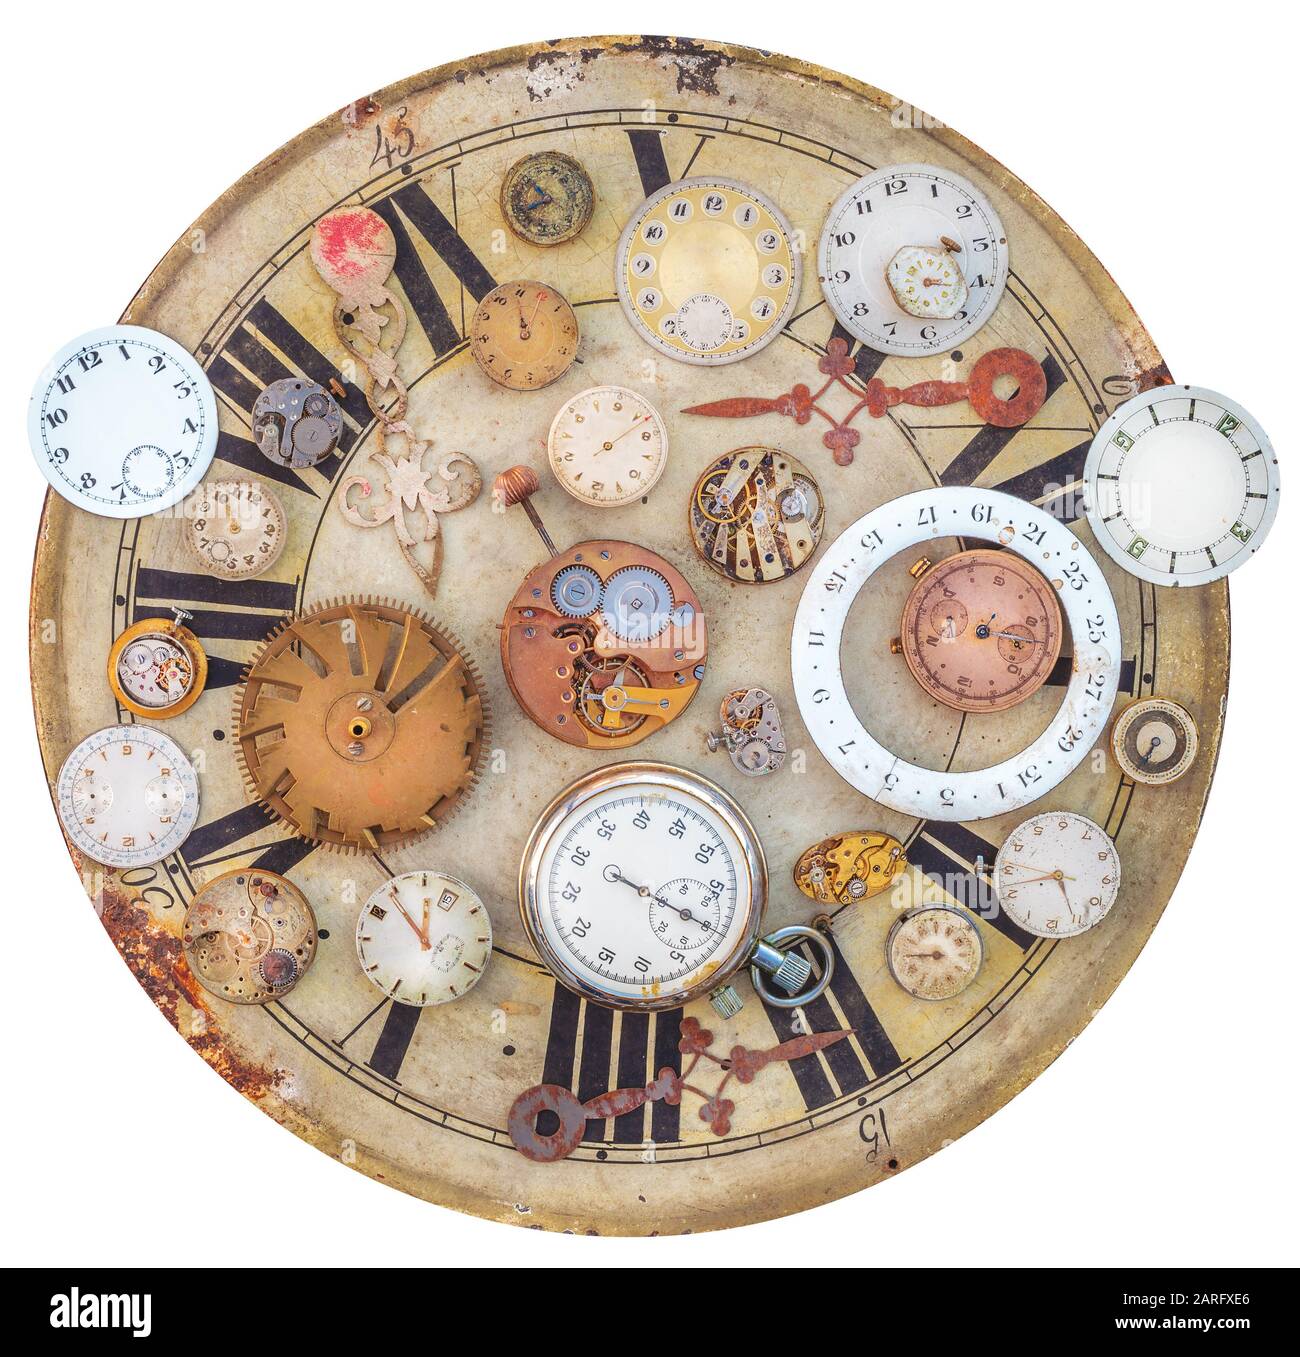 Collection of vintage rusty watches and clock parts on an old clock face Stock Photo